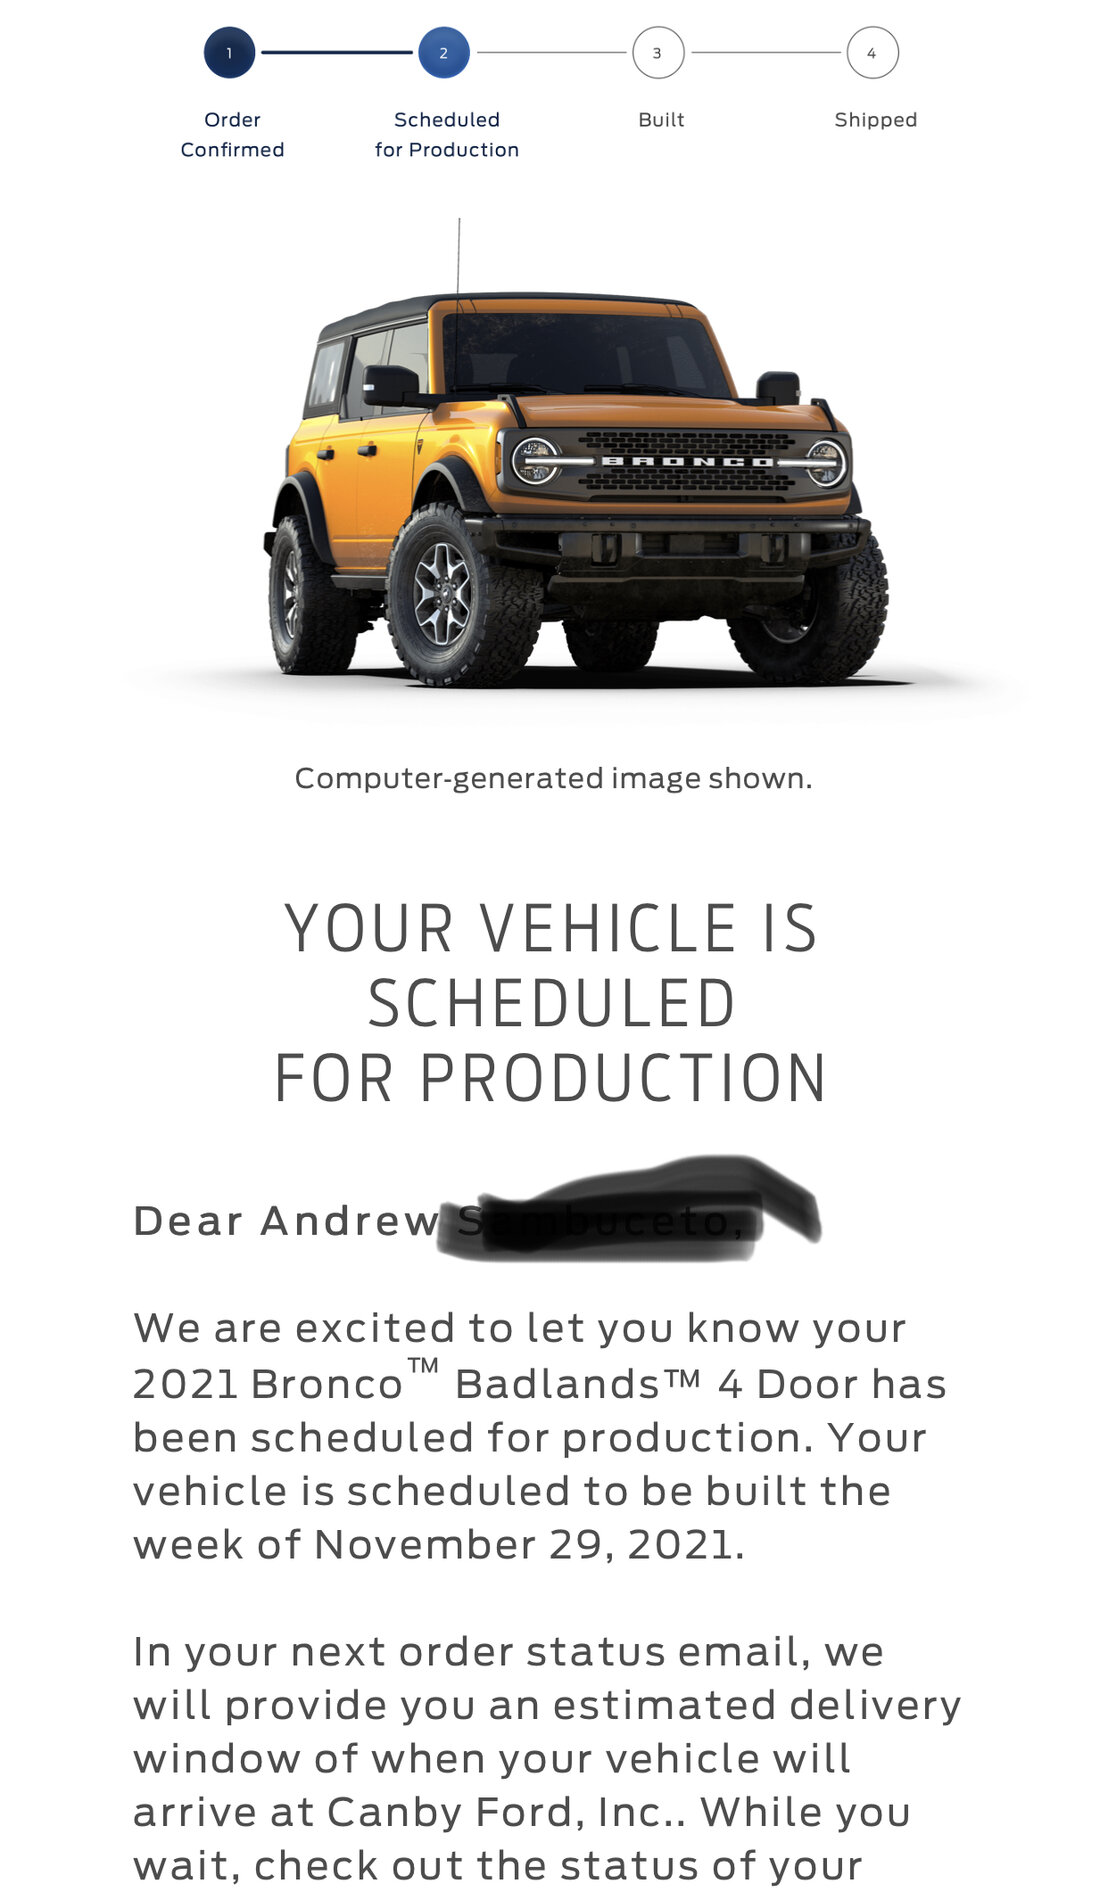 Ford Bronco 📬 9/30 Scheduling email received group! [Post your reservation + build dates] 793C9B6A-3F46-43F5-A623-0EFA7BFDEEA0